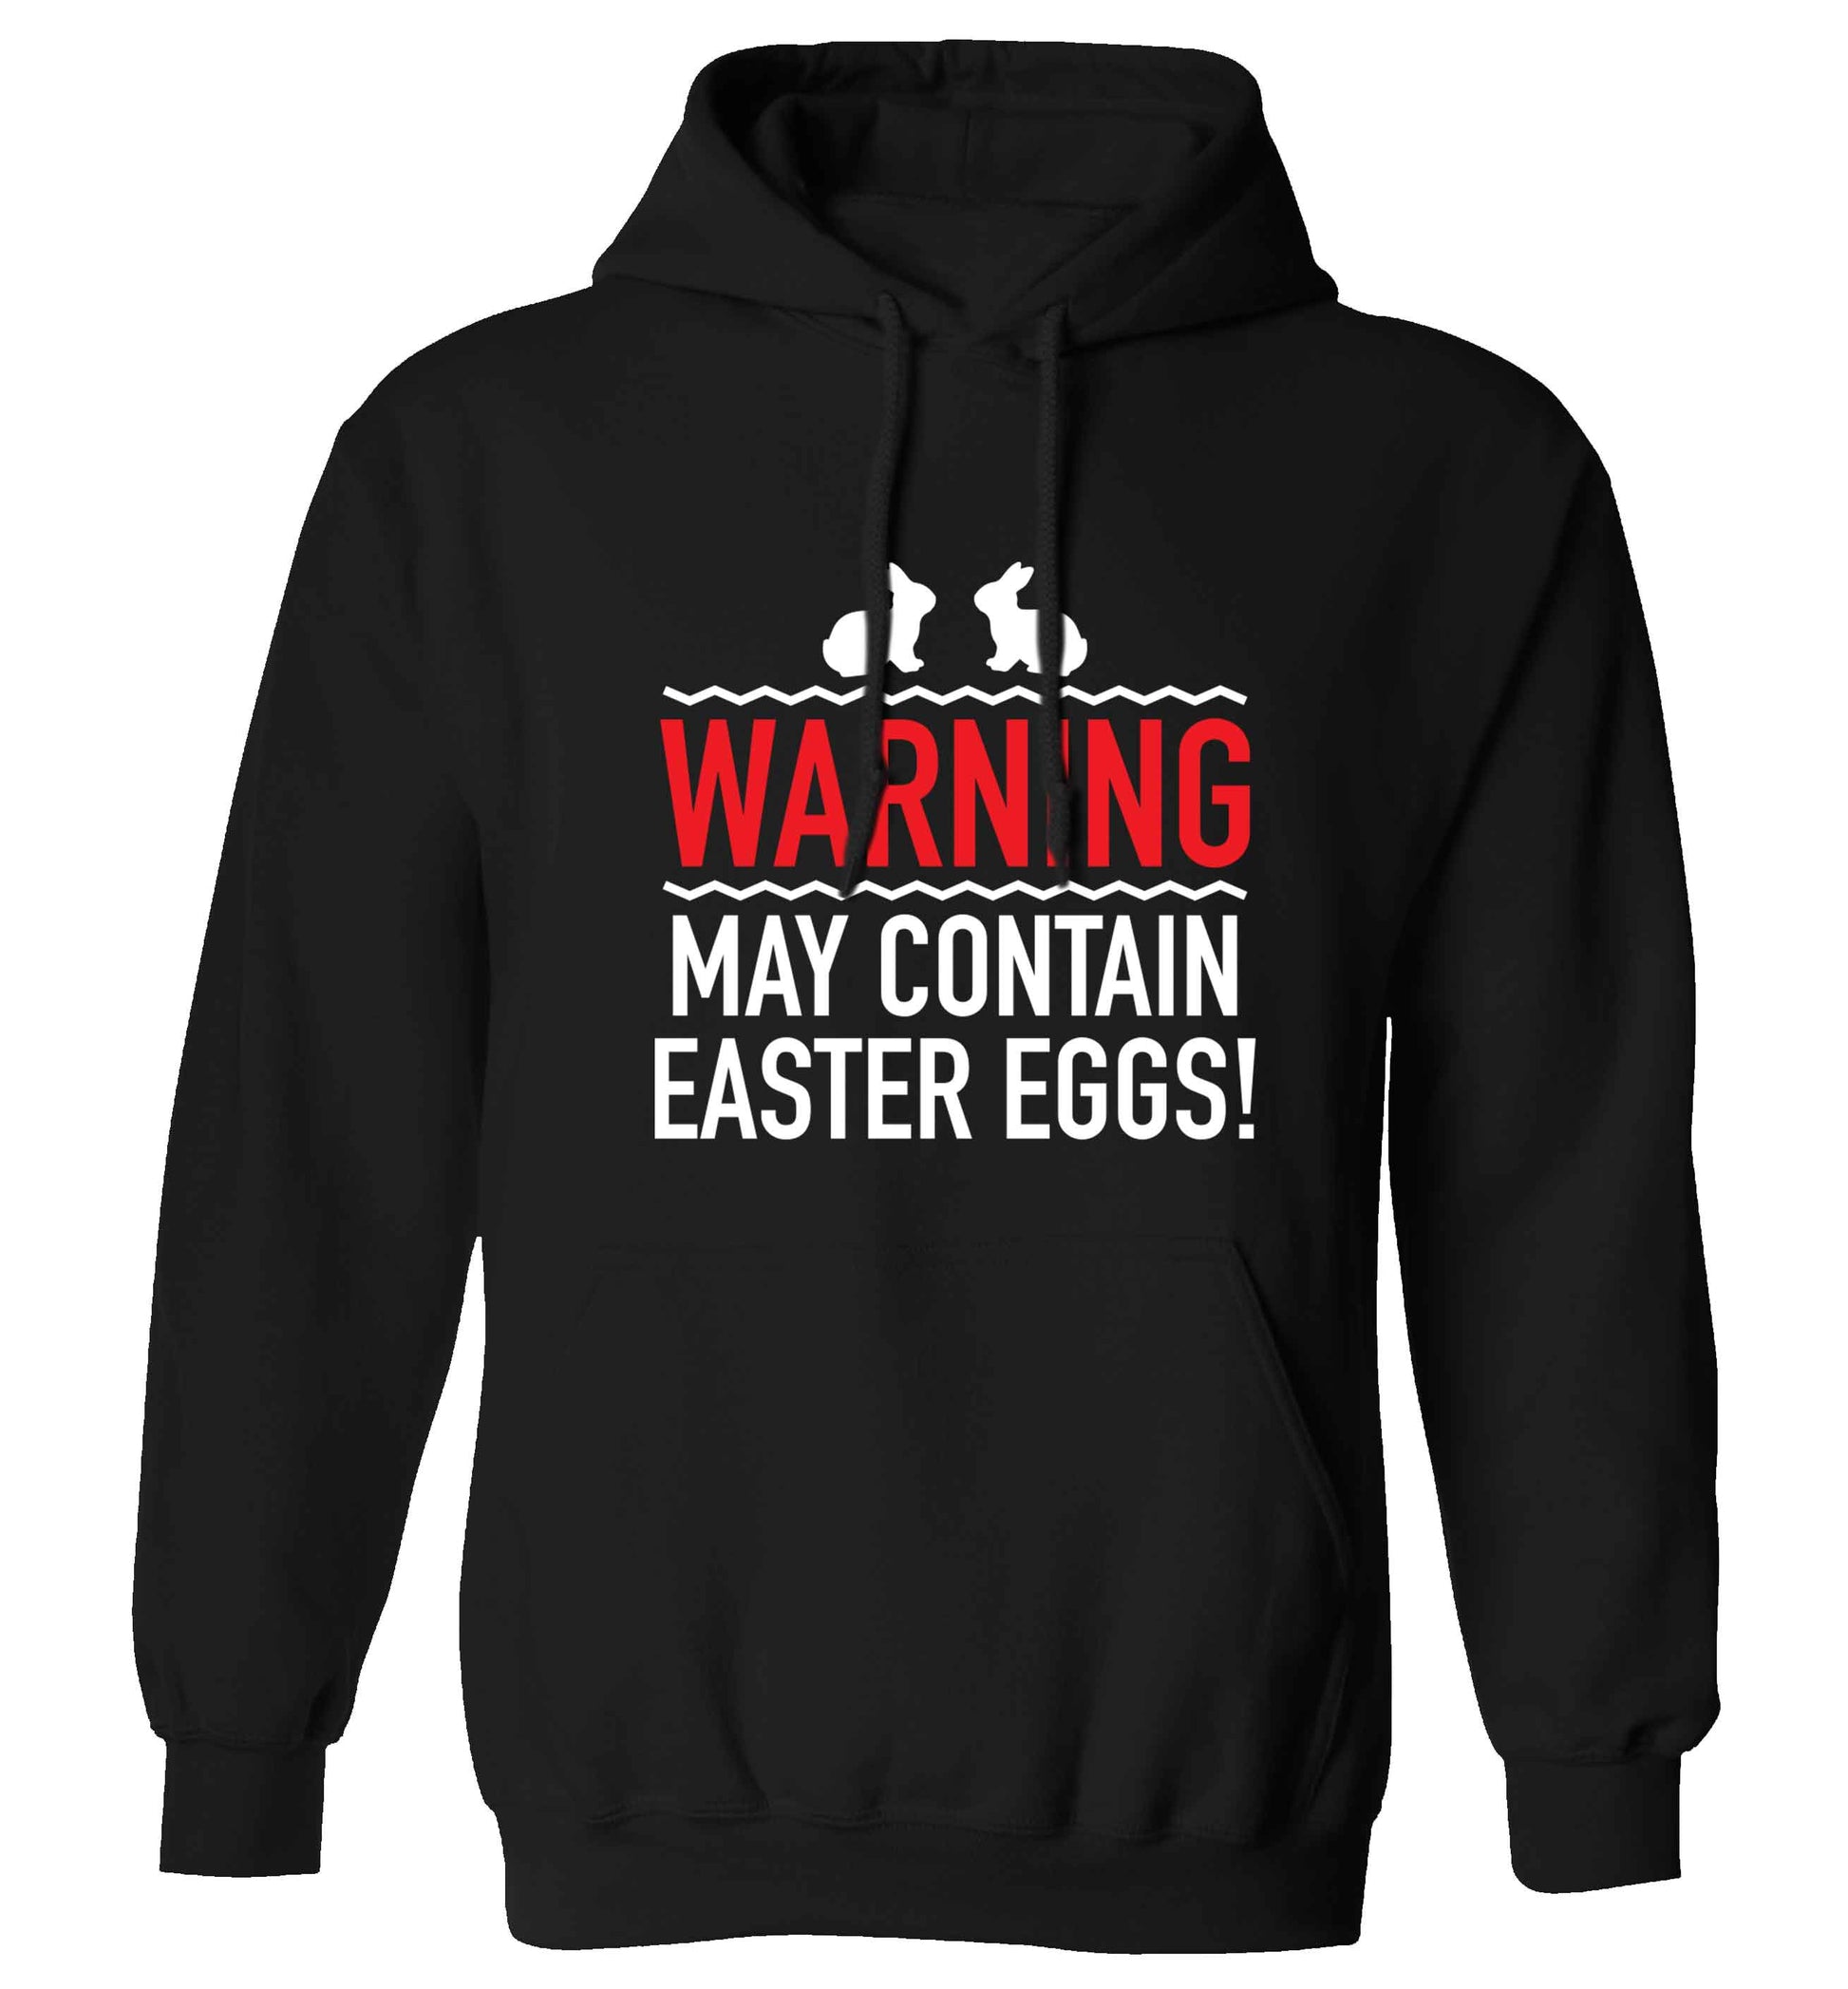 Warning may contain Easter eggs adults unisex black hoodie 2XL